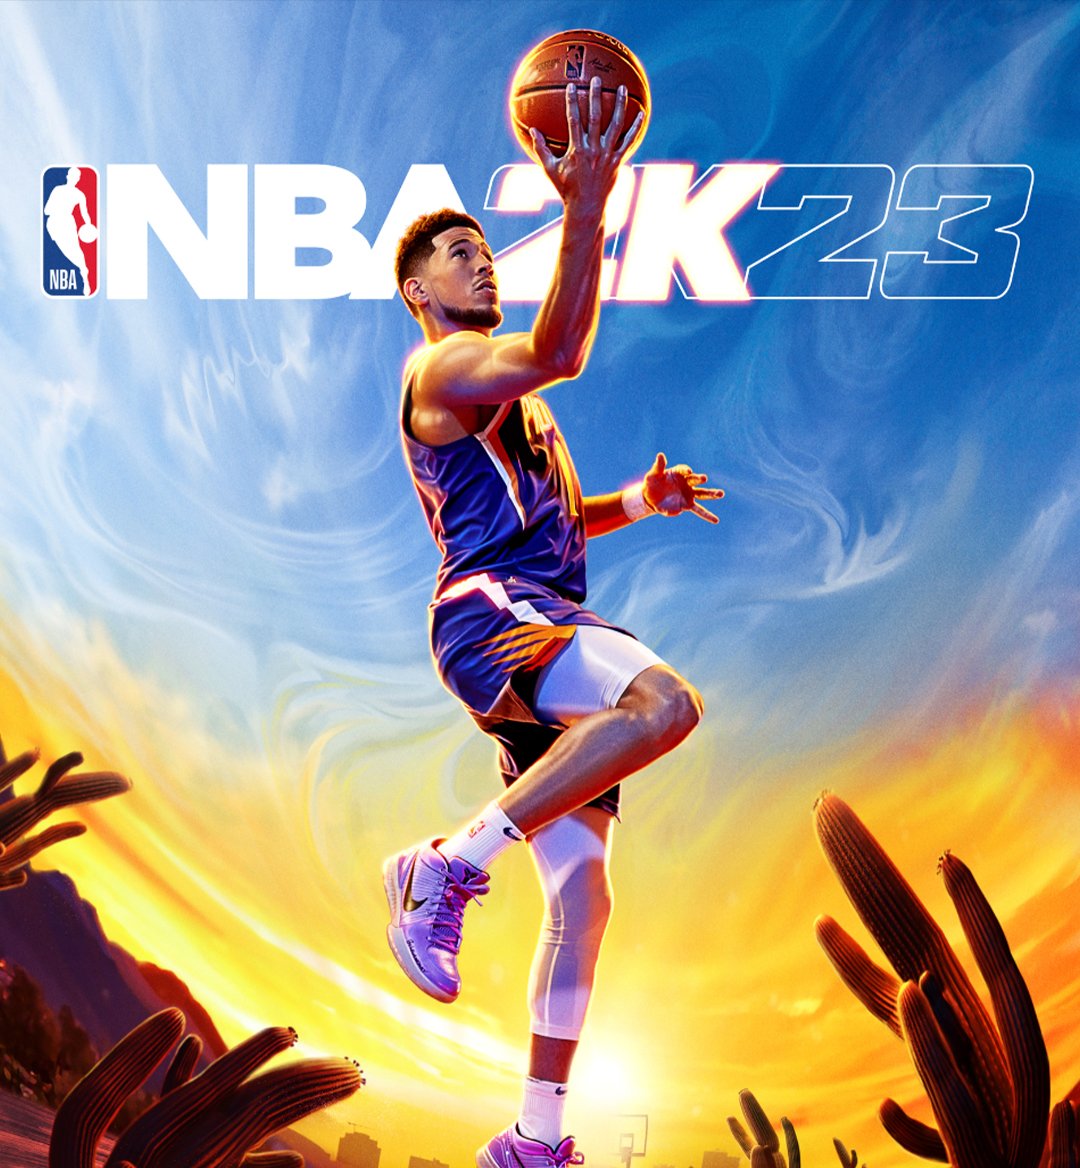 How NBA 2K23 Is Creating Opportunities For Designers and Musicians